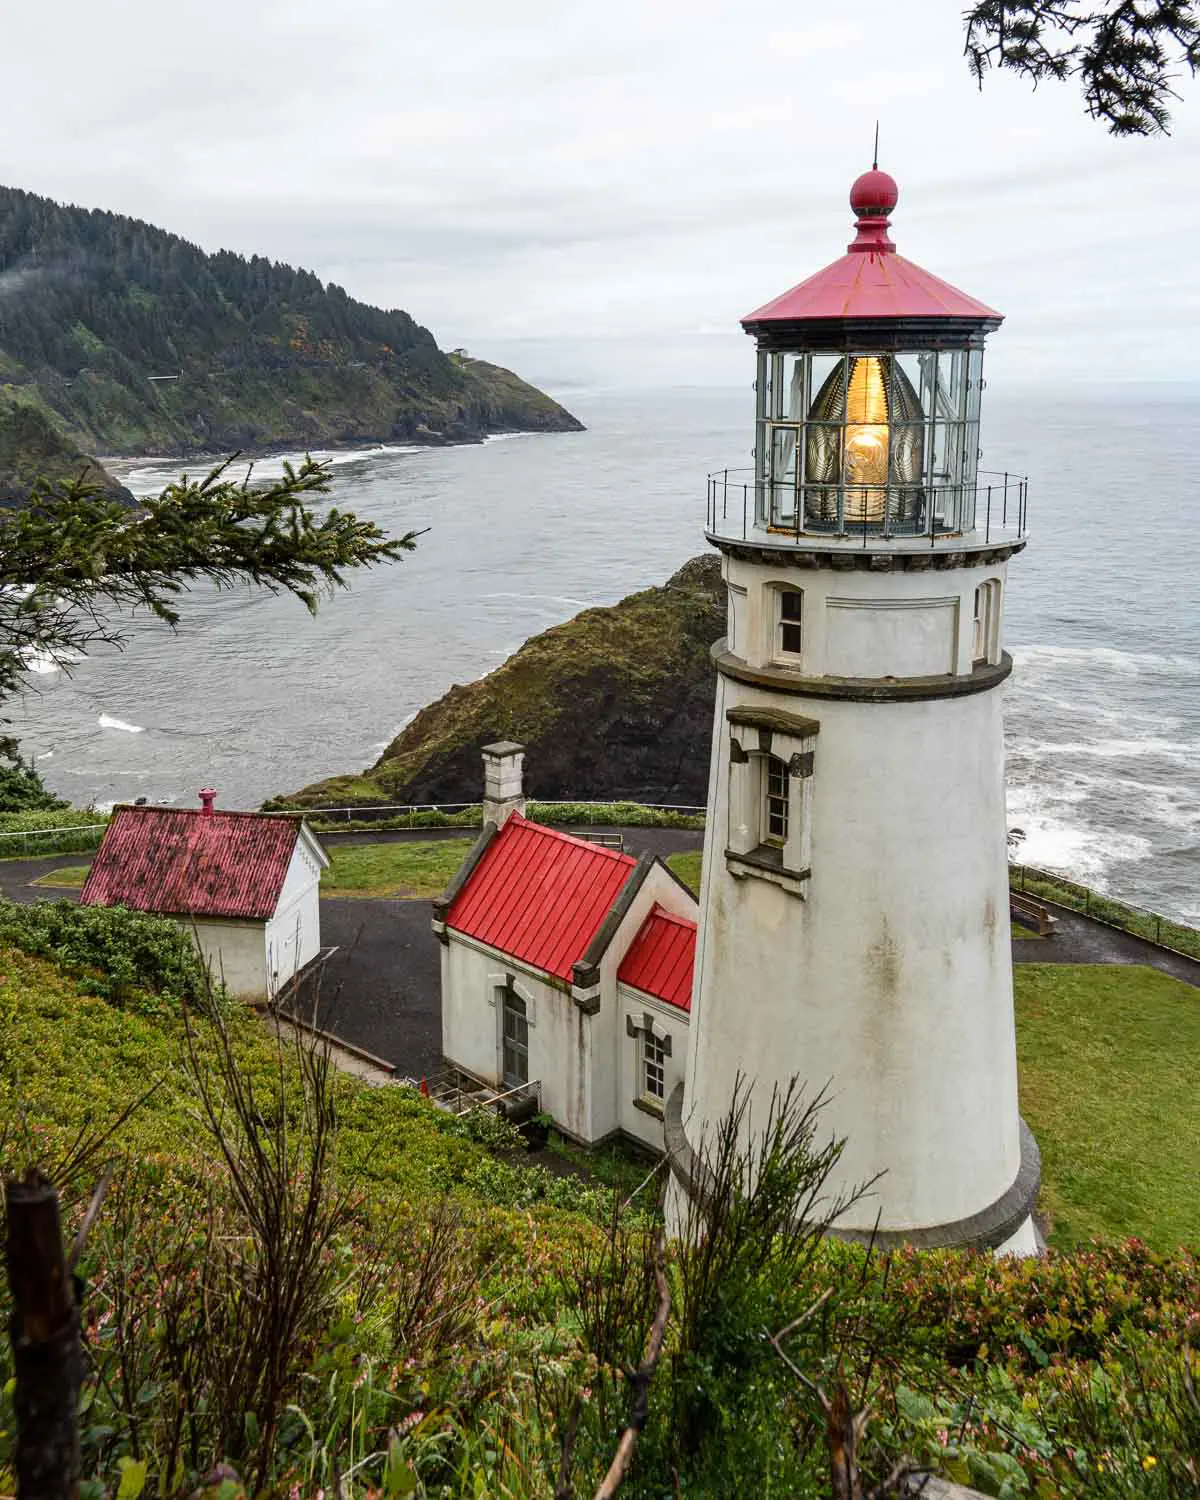 The Haceta Head lighthouse on a bluff